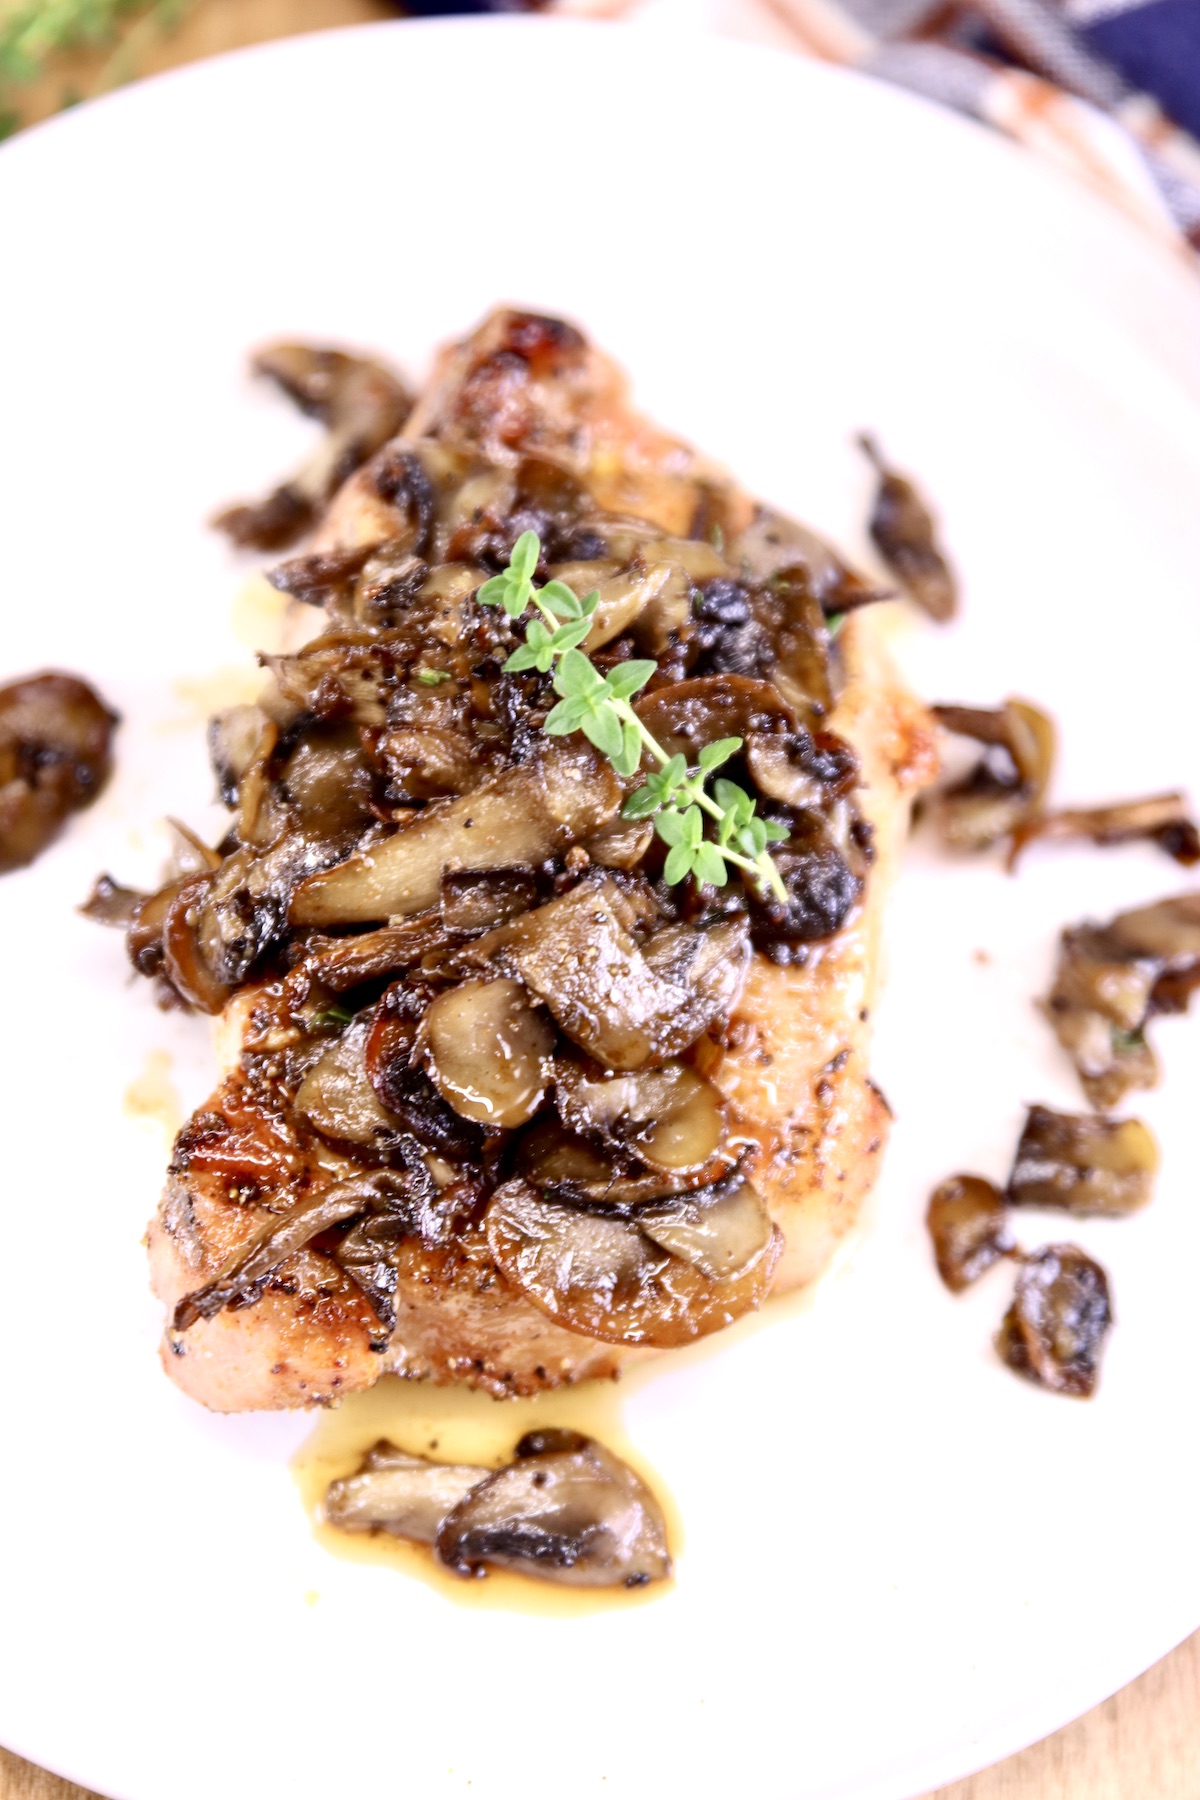 Grilled Pork Chop topped with mushrooms